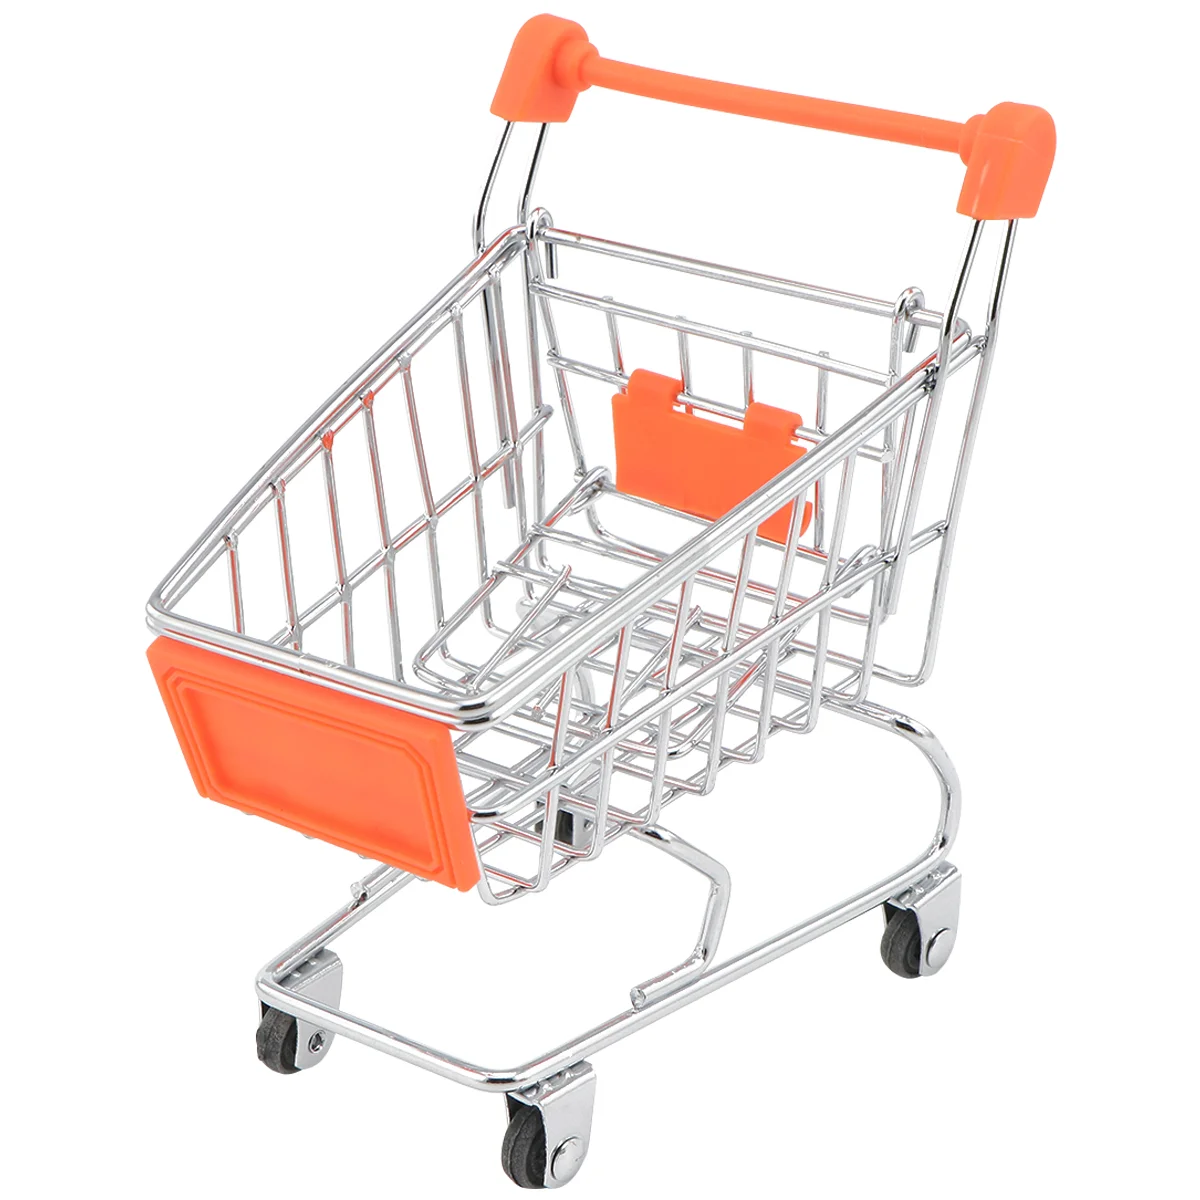 

Cart Shopping Mini Trolley Toy Brands Kids Play Storage Supermarket Pretend Playset Role Pen Tiny Mall Store Metal Basket